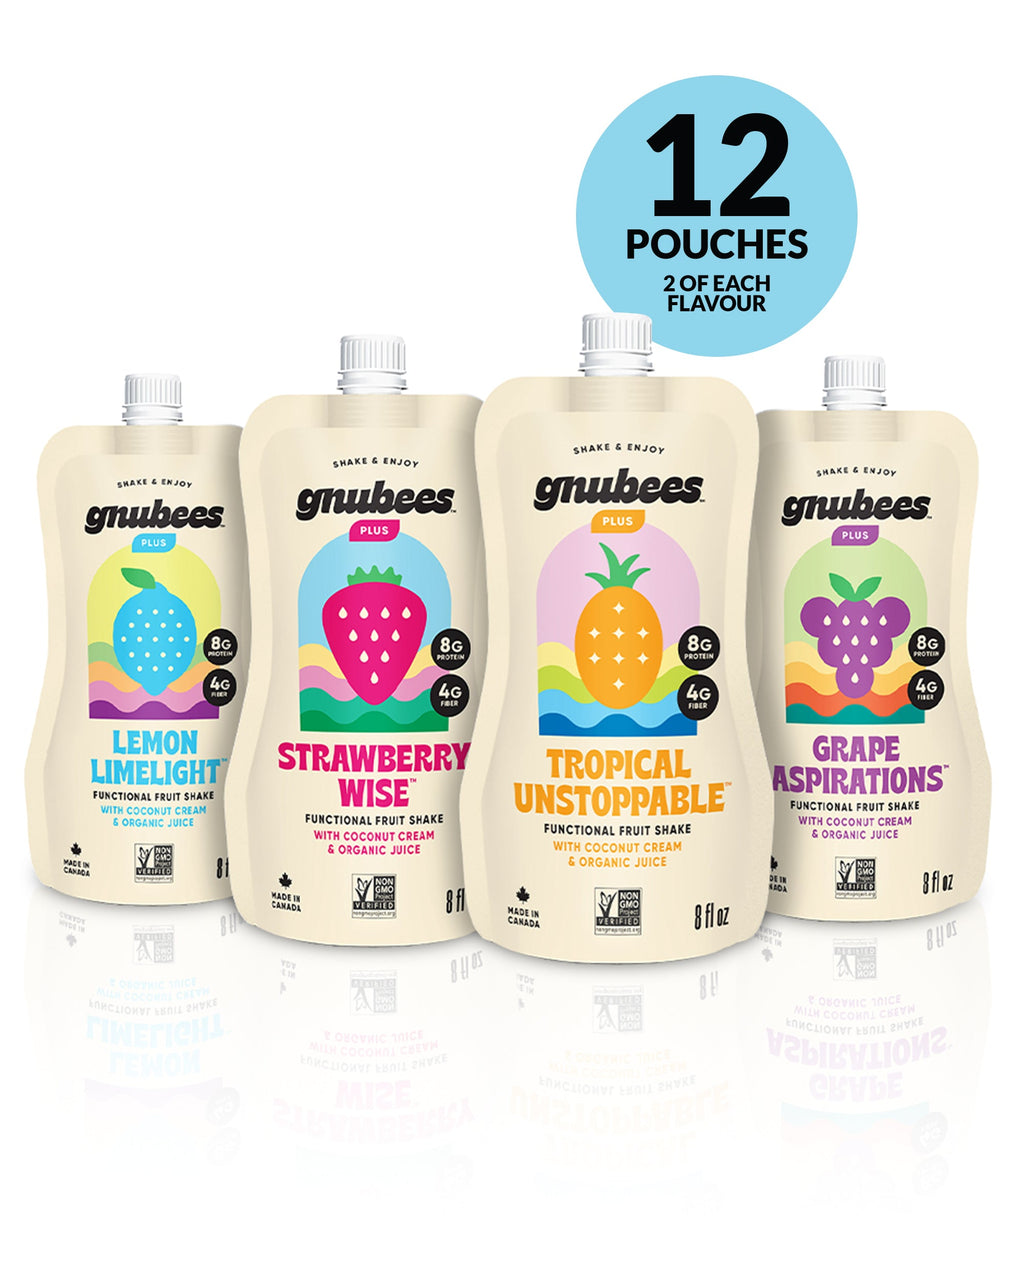 Gnubees Plus Mix Box - 12 pouches - firstorganicbaby